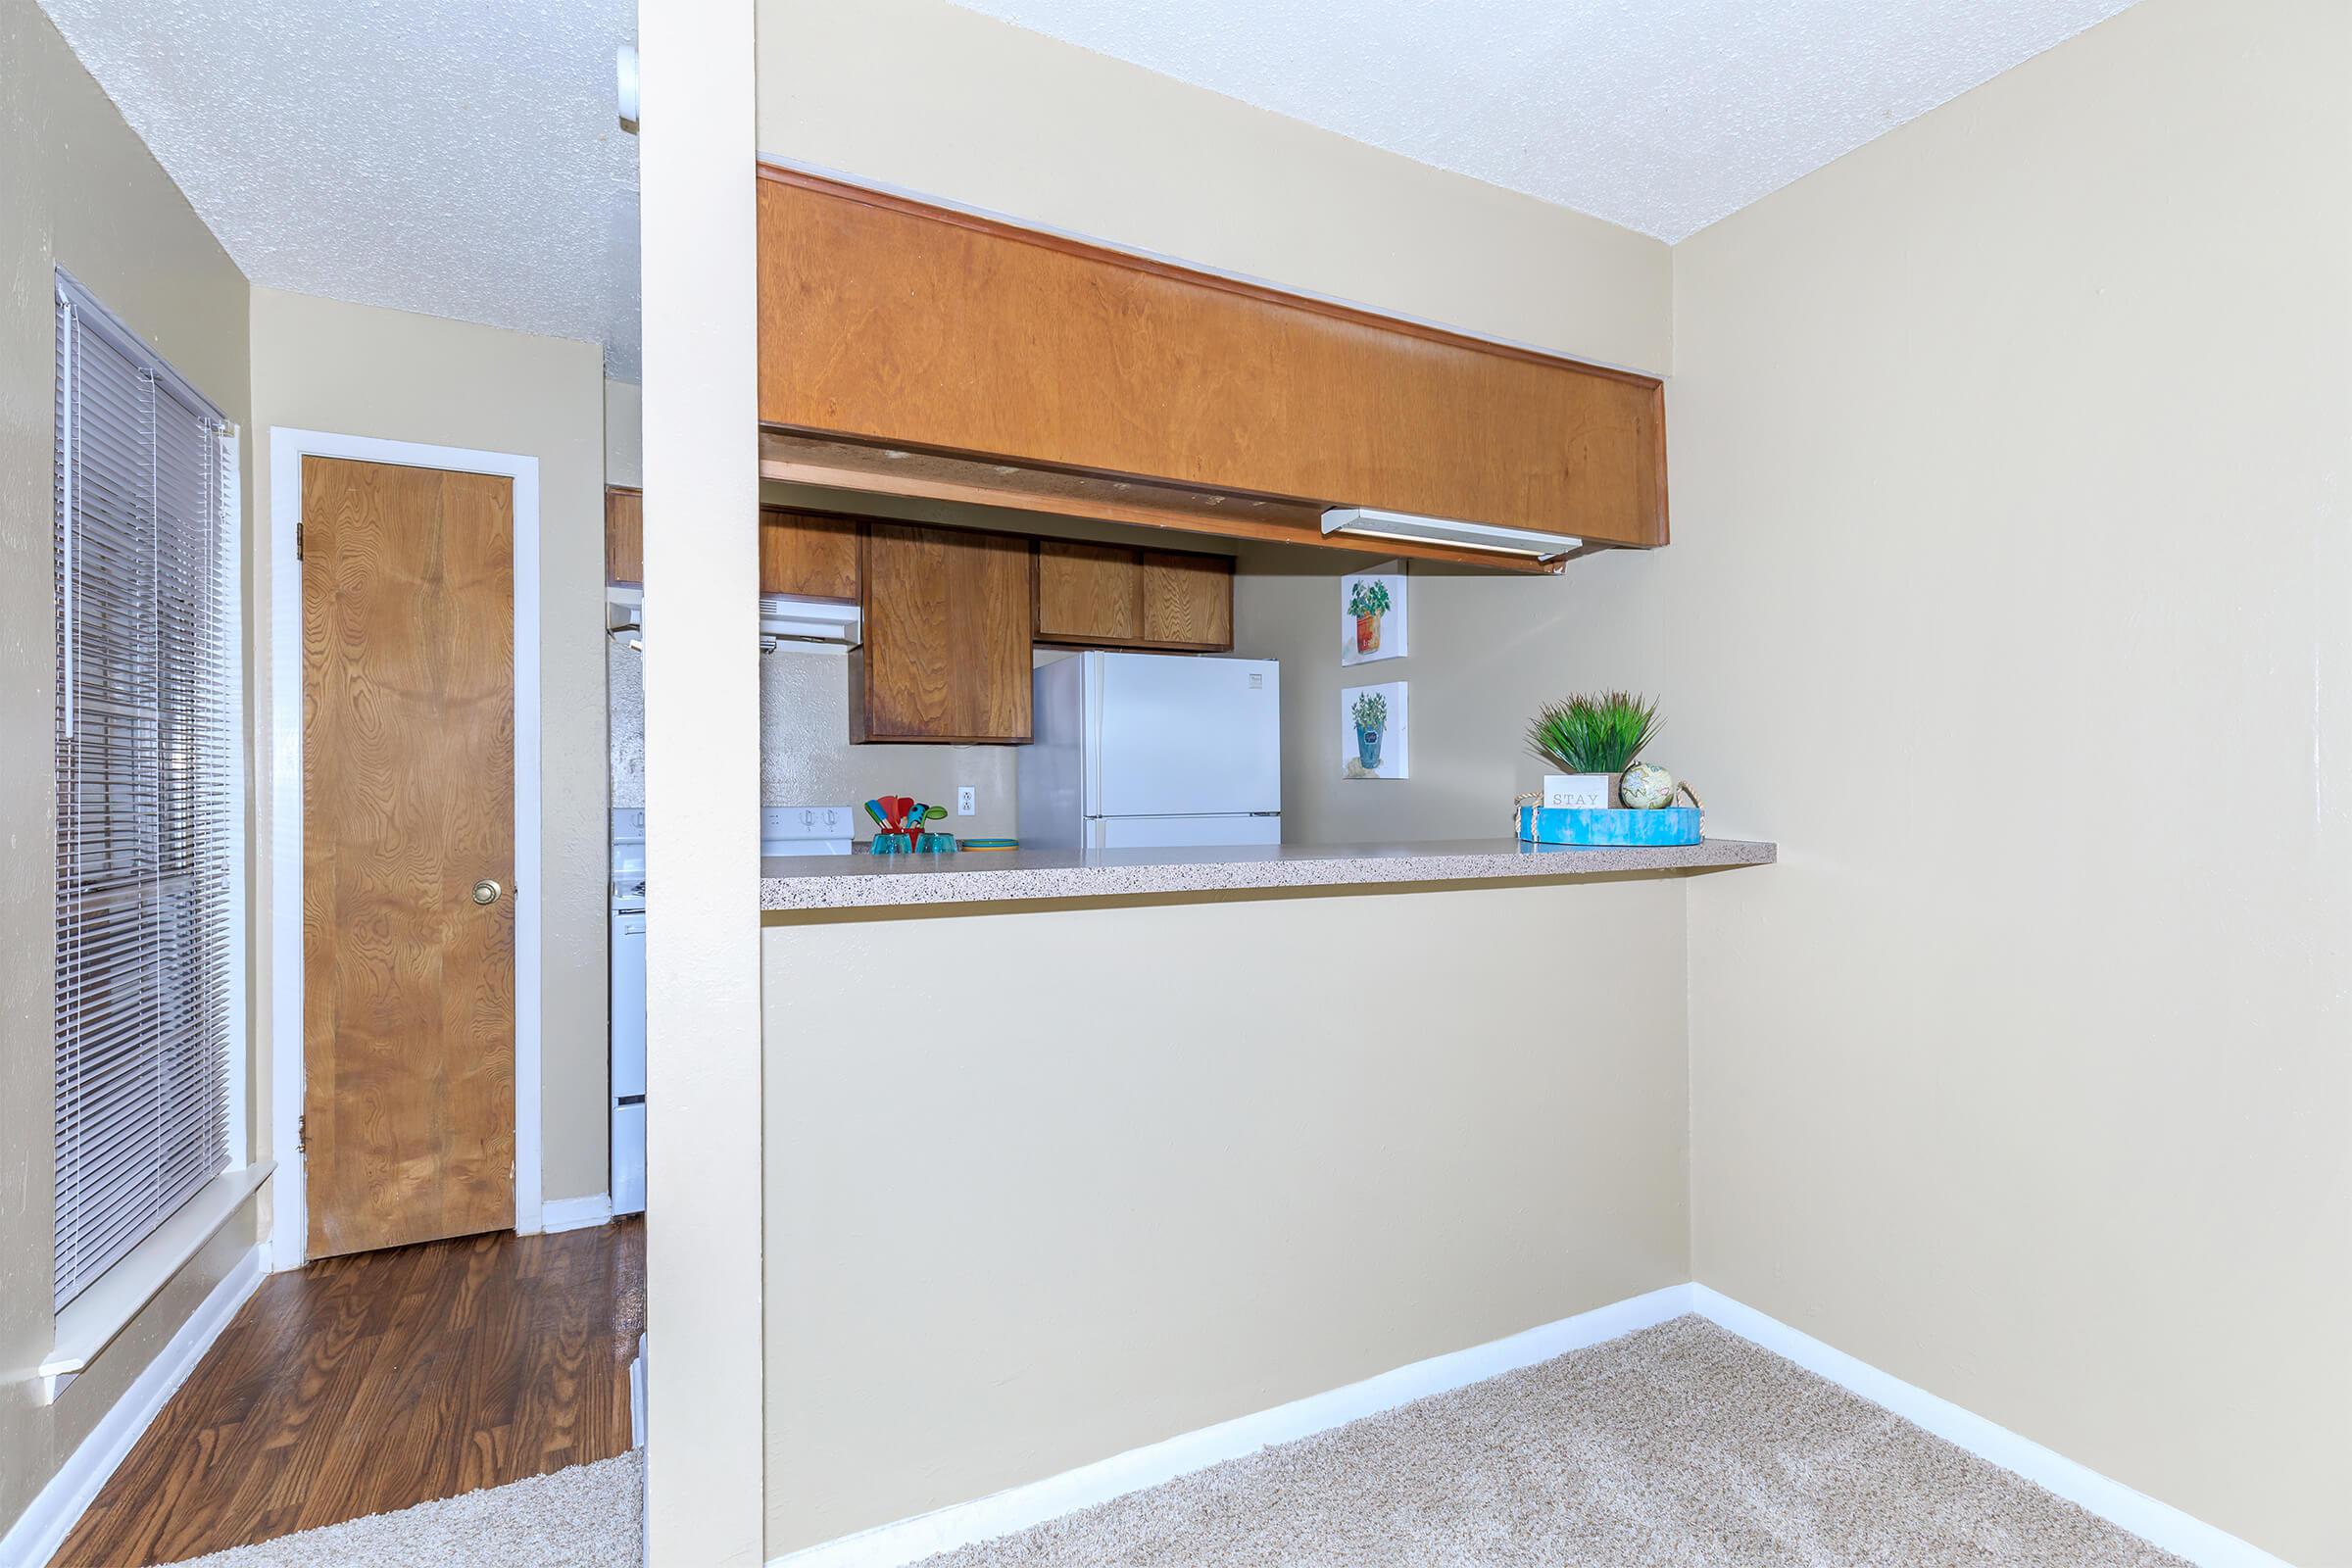 WELL-EQUIPPED KITCHEN WITH PANTRY